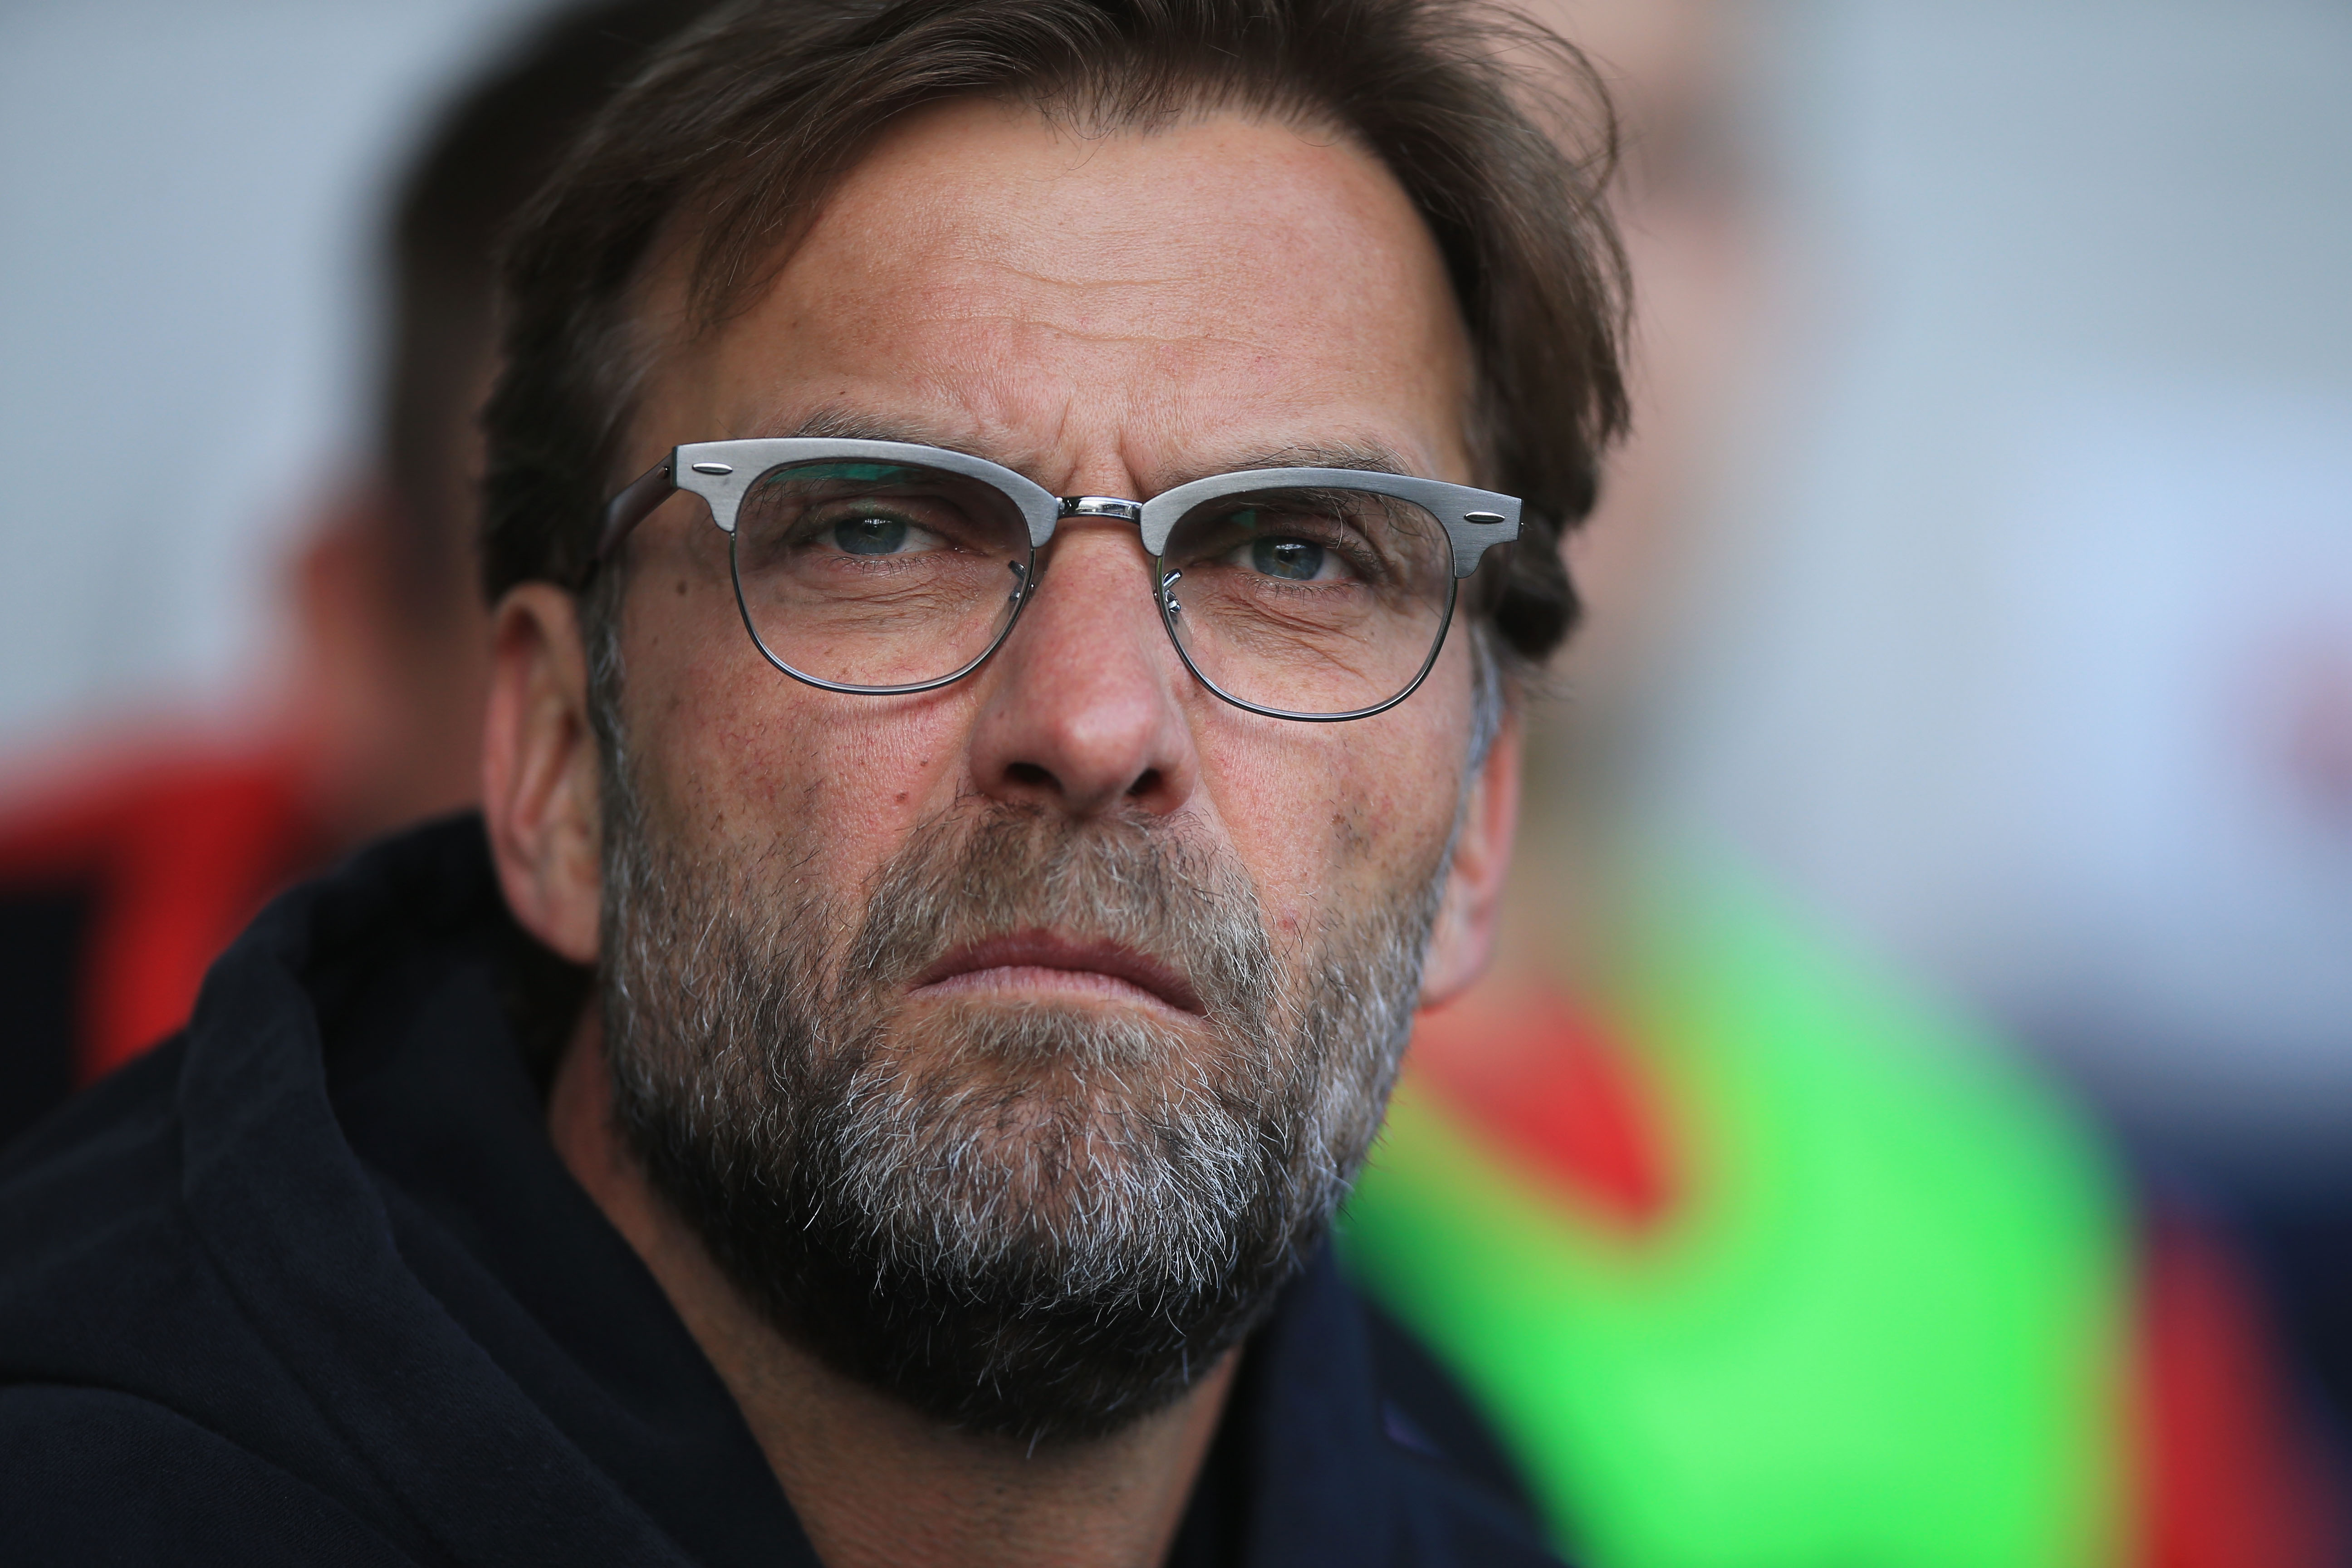 WEST BROMWICH, ENGLAND - MAY 15:  Jurgen Klopp, manager of Liverpool looks on during the Barclays Premier League match between West Bromwich Albion and Liverpool at The Hawthorns on May 15, 2016 in West Bromwich, England.  (Photo by Ben Hoskins/Getty Images)